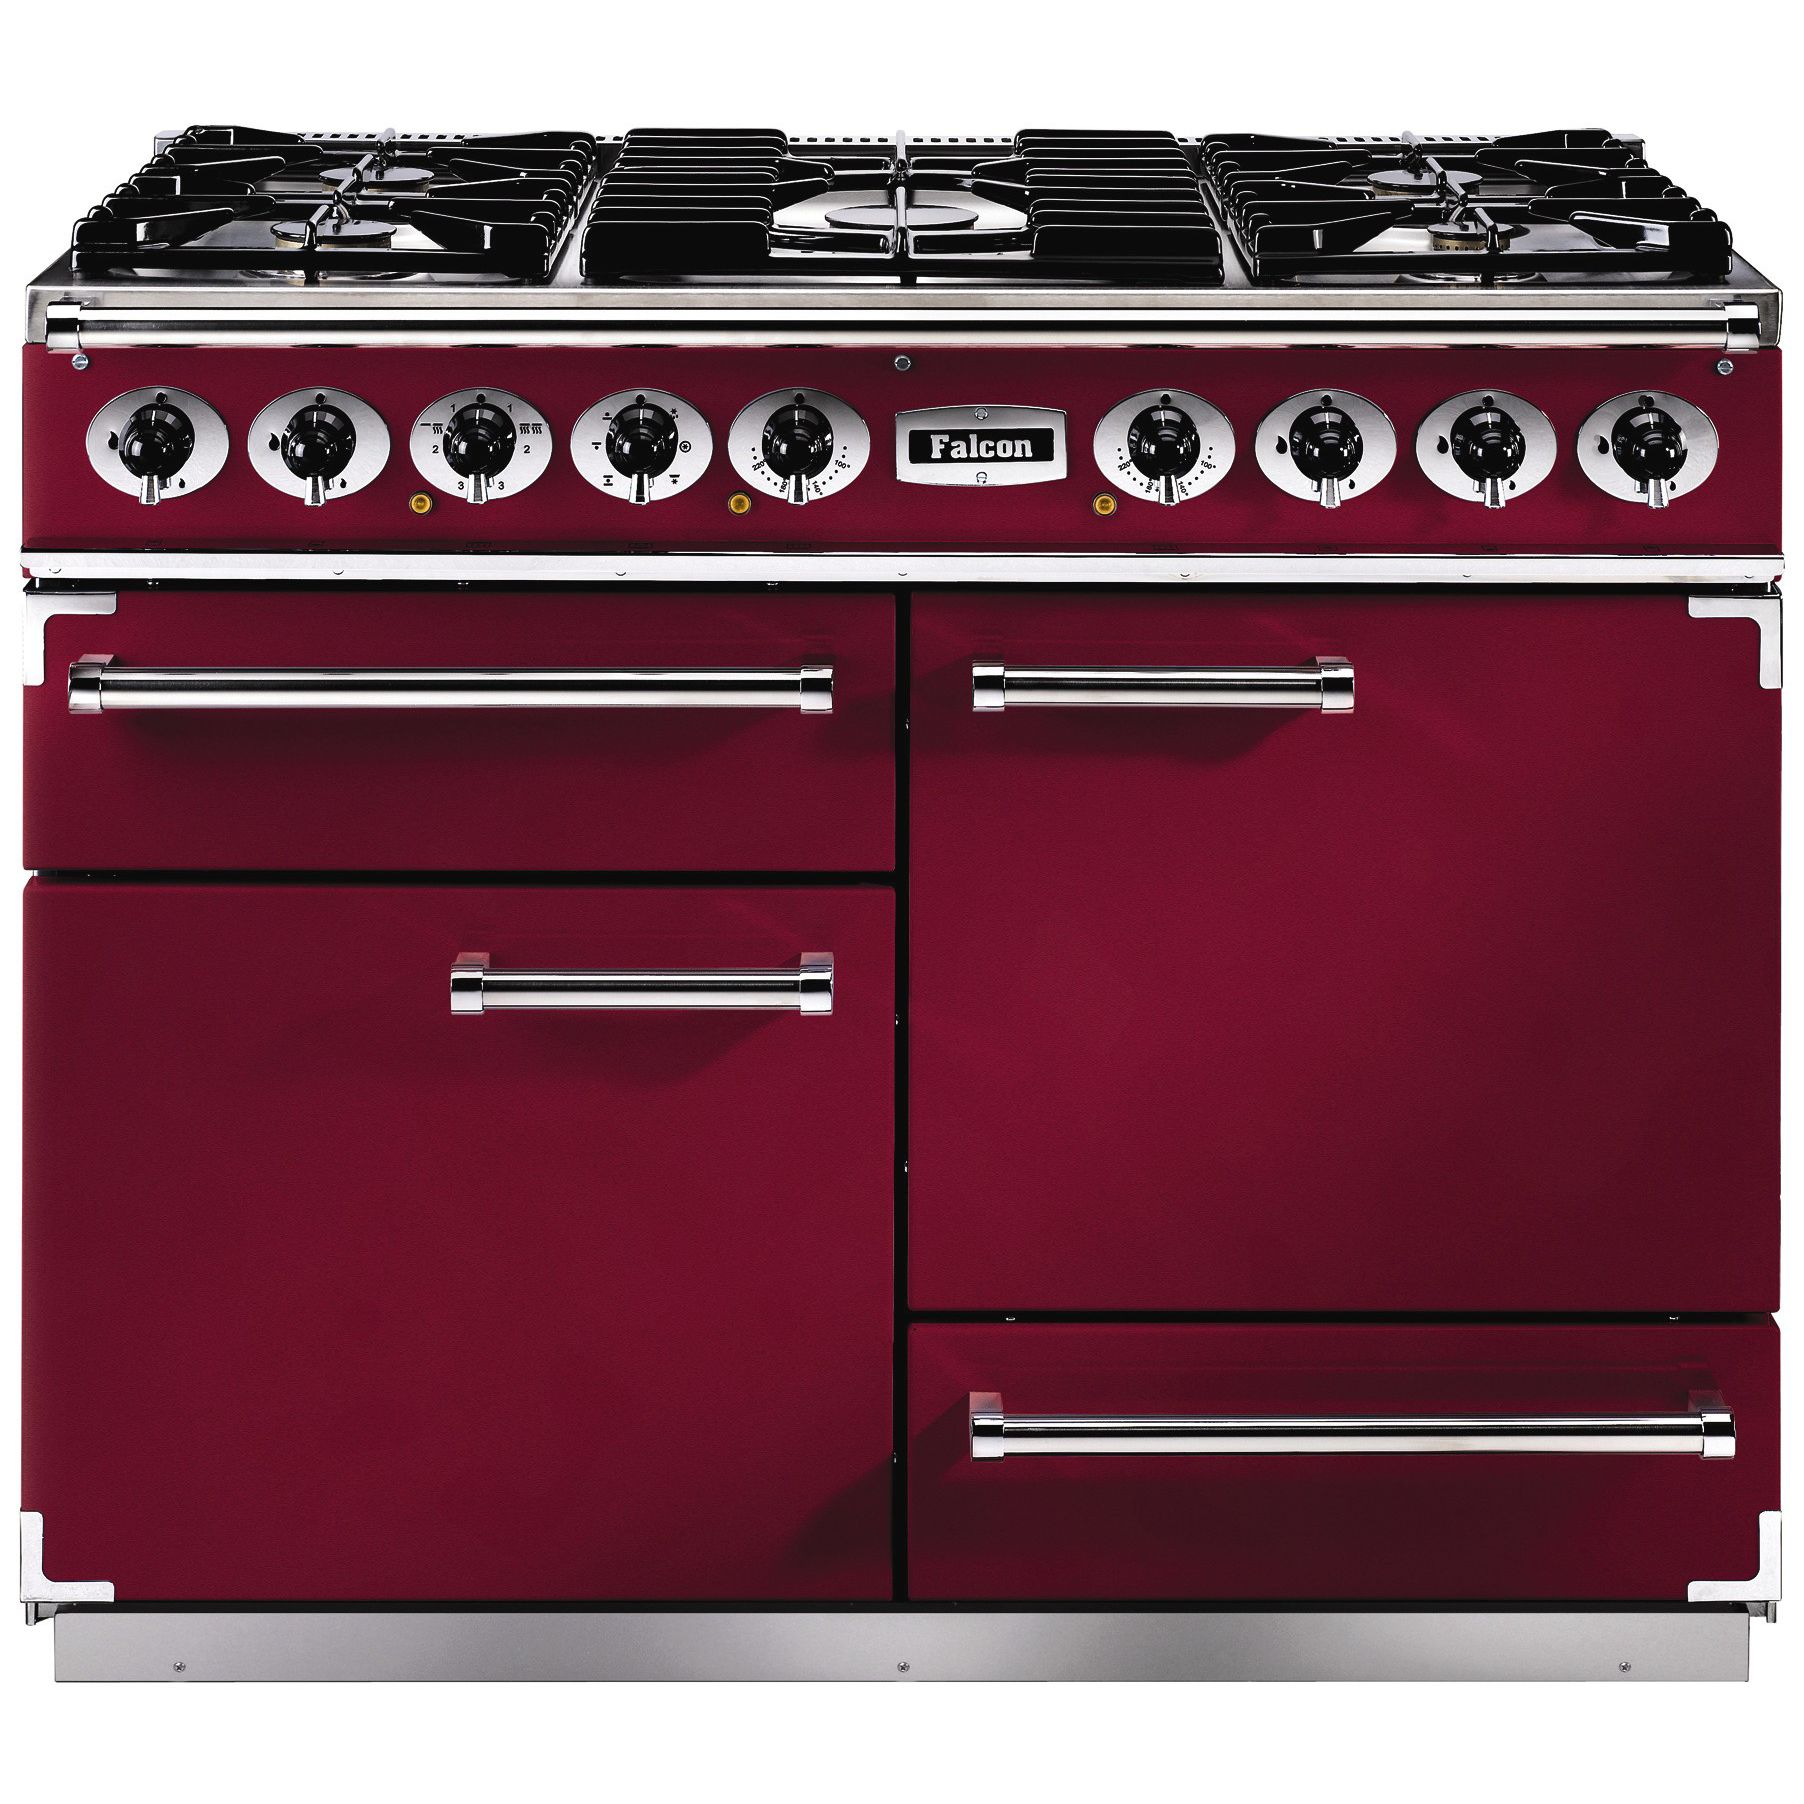 Falcon Deluxe 1092 Dual Fuel Range Cooker, Cranberry / Gloss Chrome at John Lewis